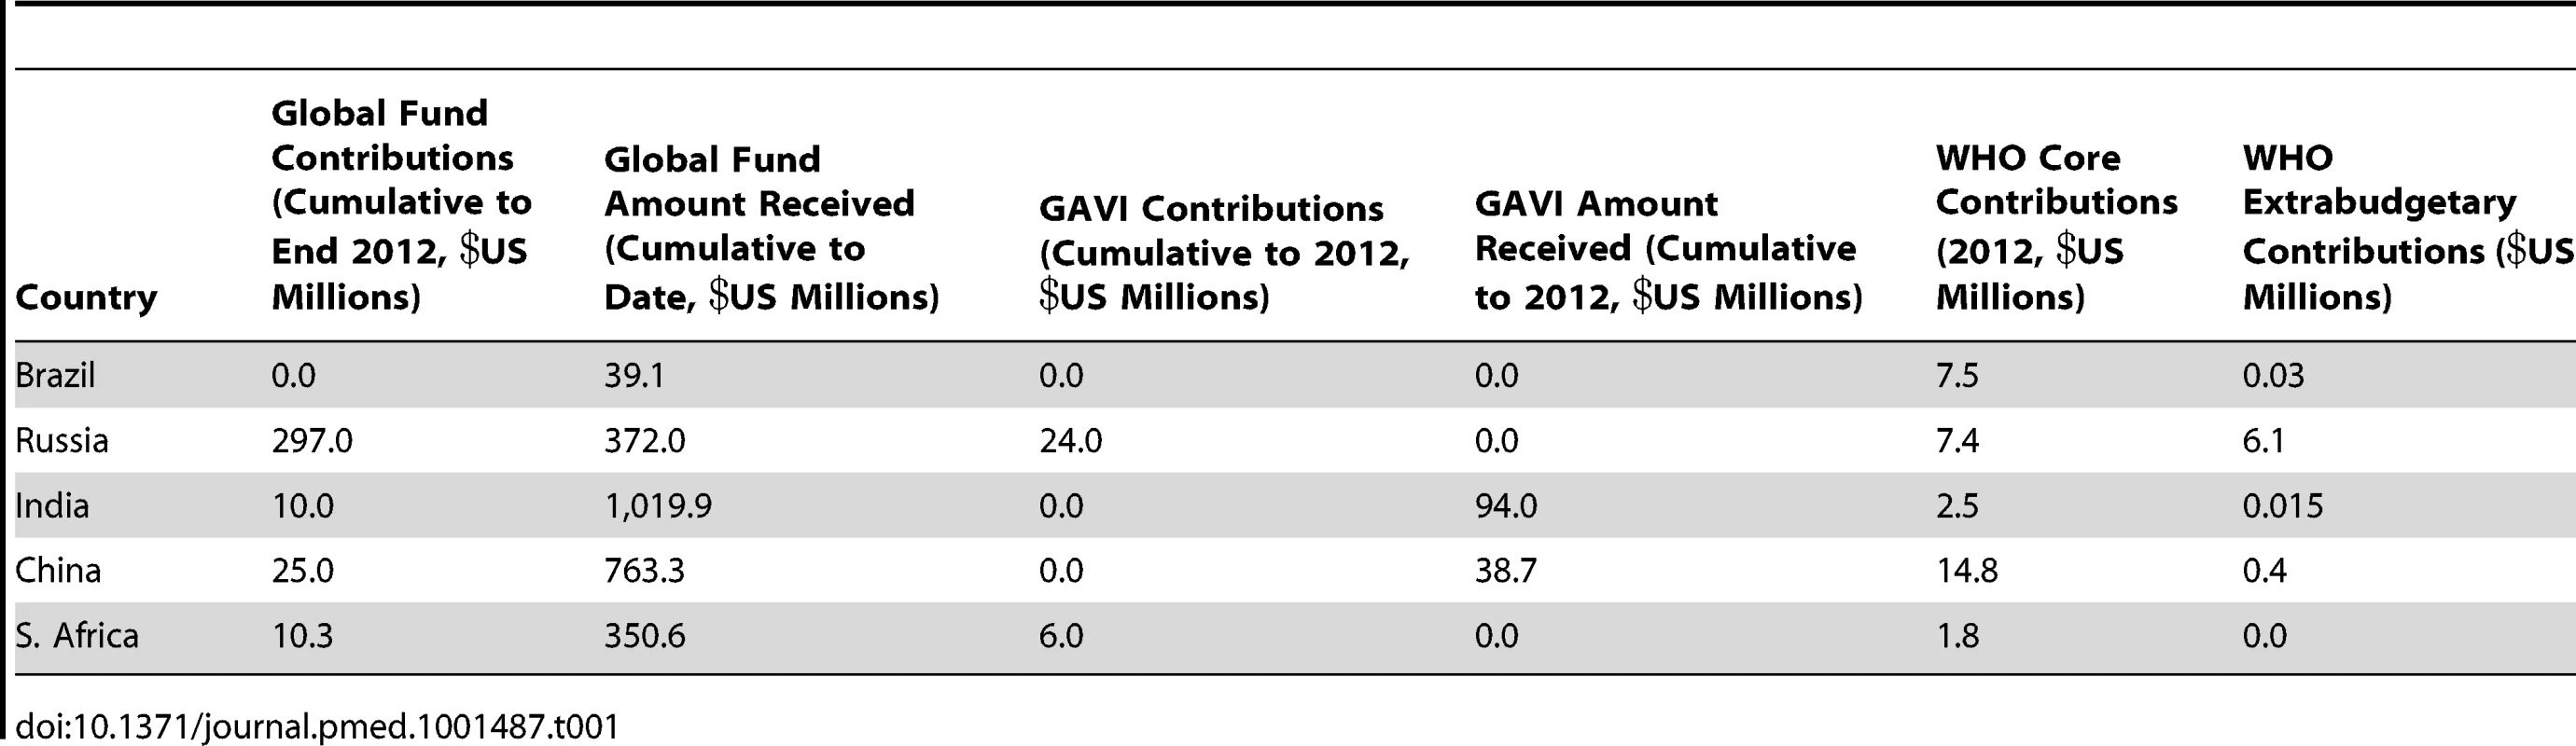 BRIC financial contribution to key global health institutions and amount received from Global Fund and GAVI &lt;em class=&quot;ref&quot;&gt;[14]&lt;/em&gt;–&lt;em class=&quot;ref&quot;&gt;[19]&lt;/em&gt;.